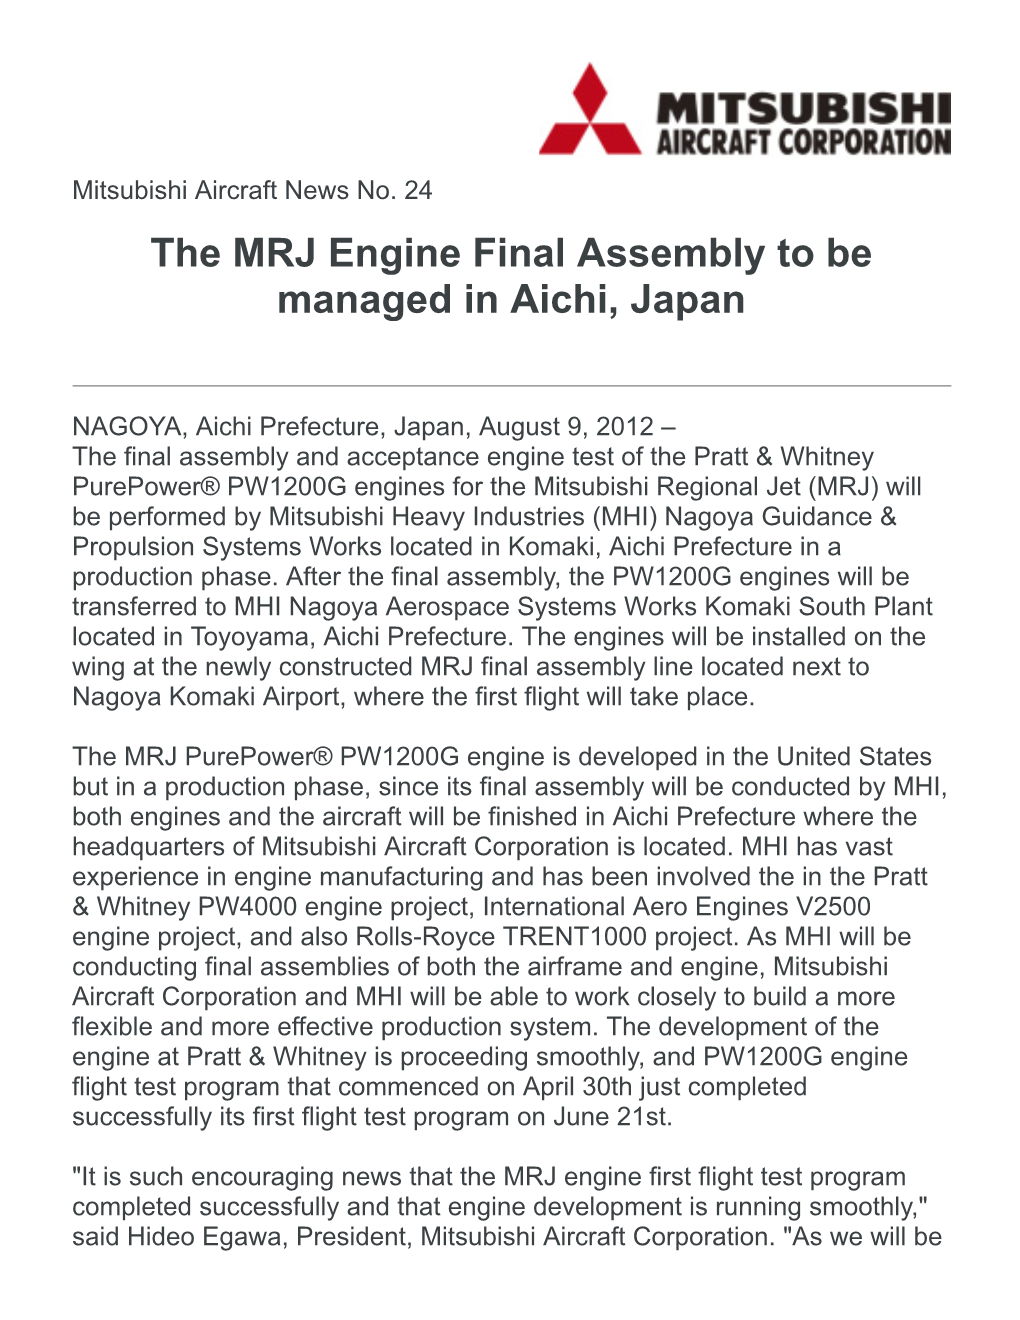 The MRJ Engine Final Assembly to Be Managed in Aichi, Japan